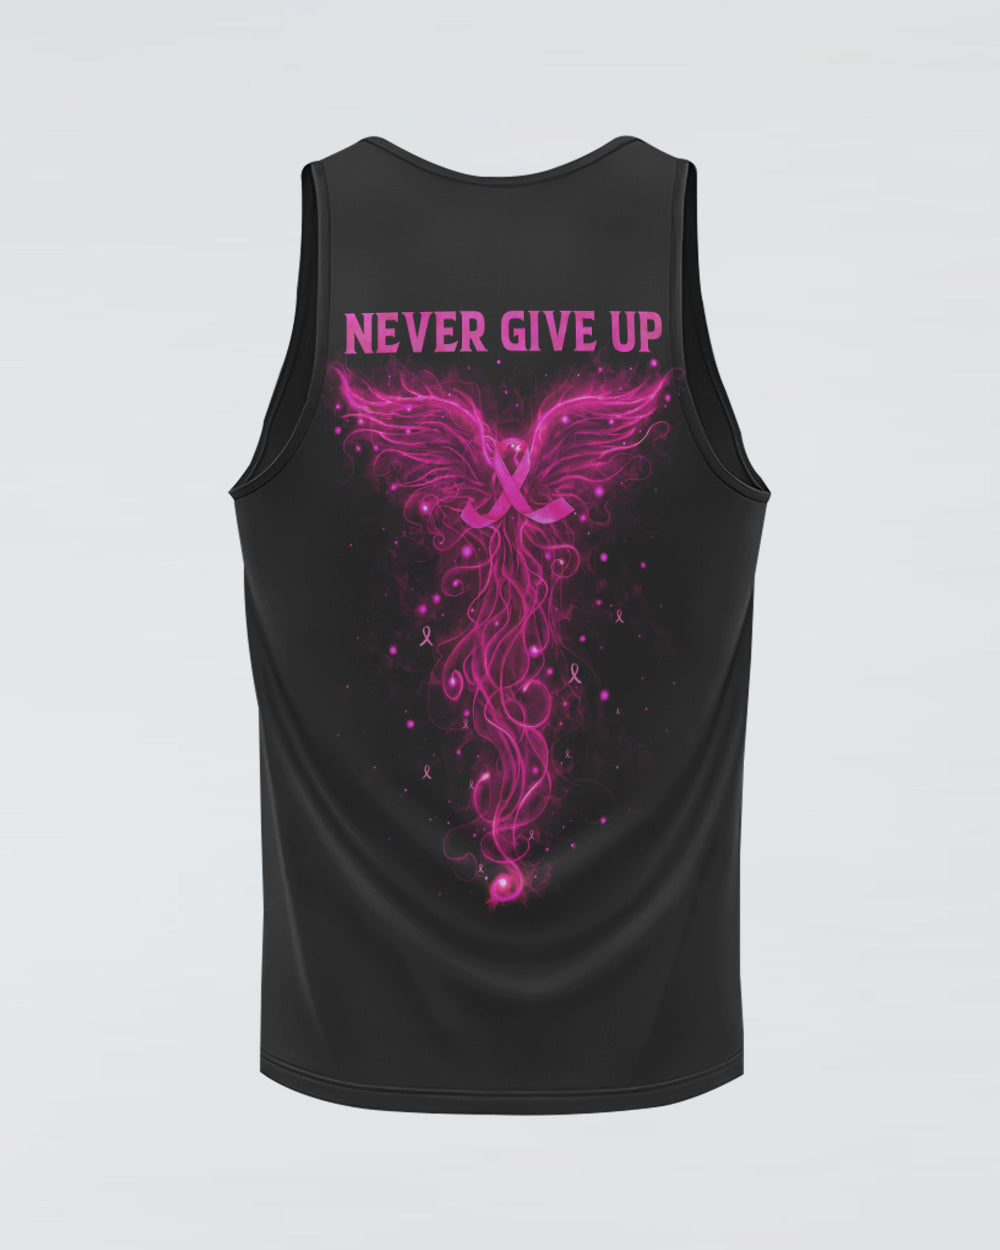 Never Give Up Phoenix Women's Breast Cancer Awareness Tanks